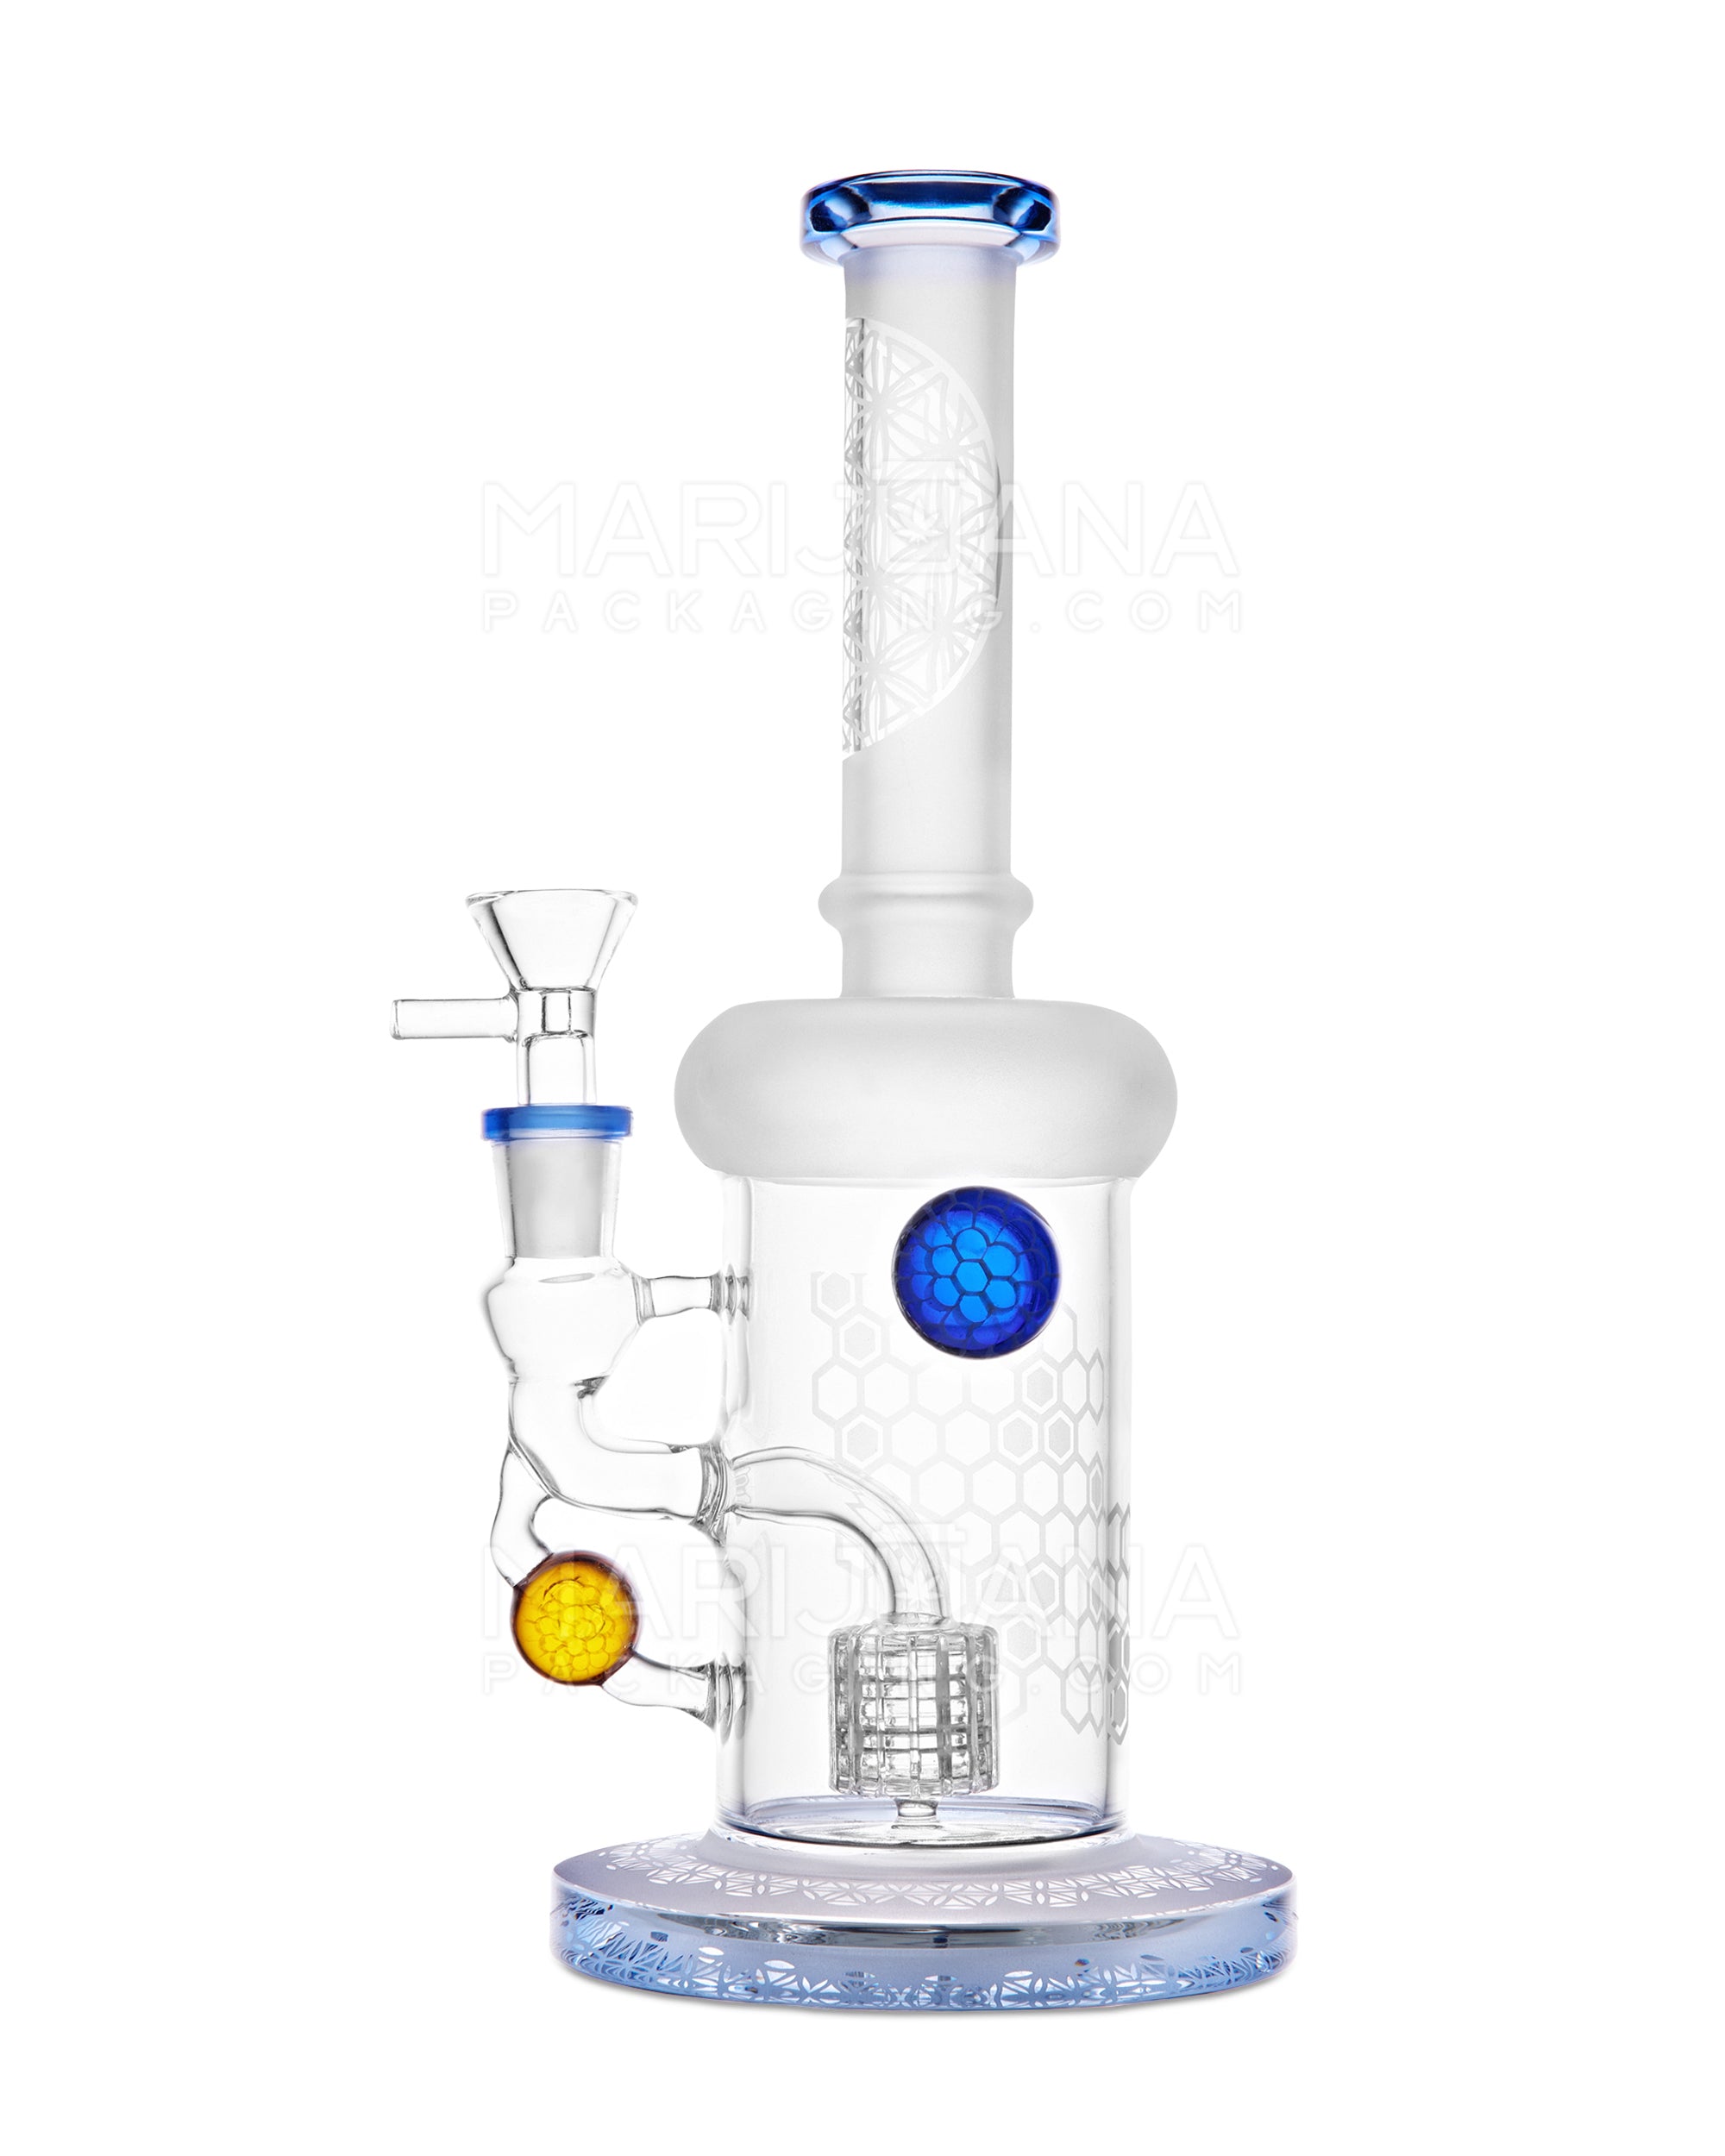 USA Glass | Straight Neck Matrix Perc Sandblasted Glass Water Pipe w/ Implosion Marbles | 11in Tall - 14mm Bowl - Blue - 1